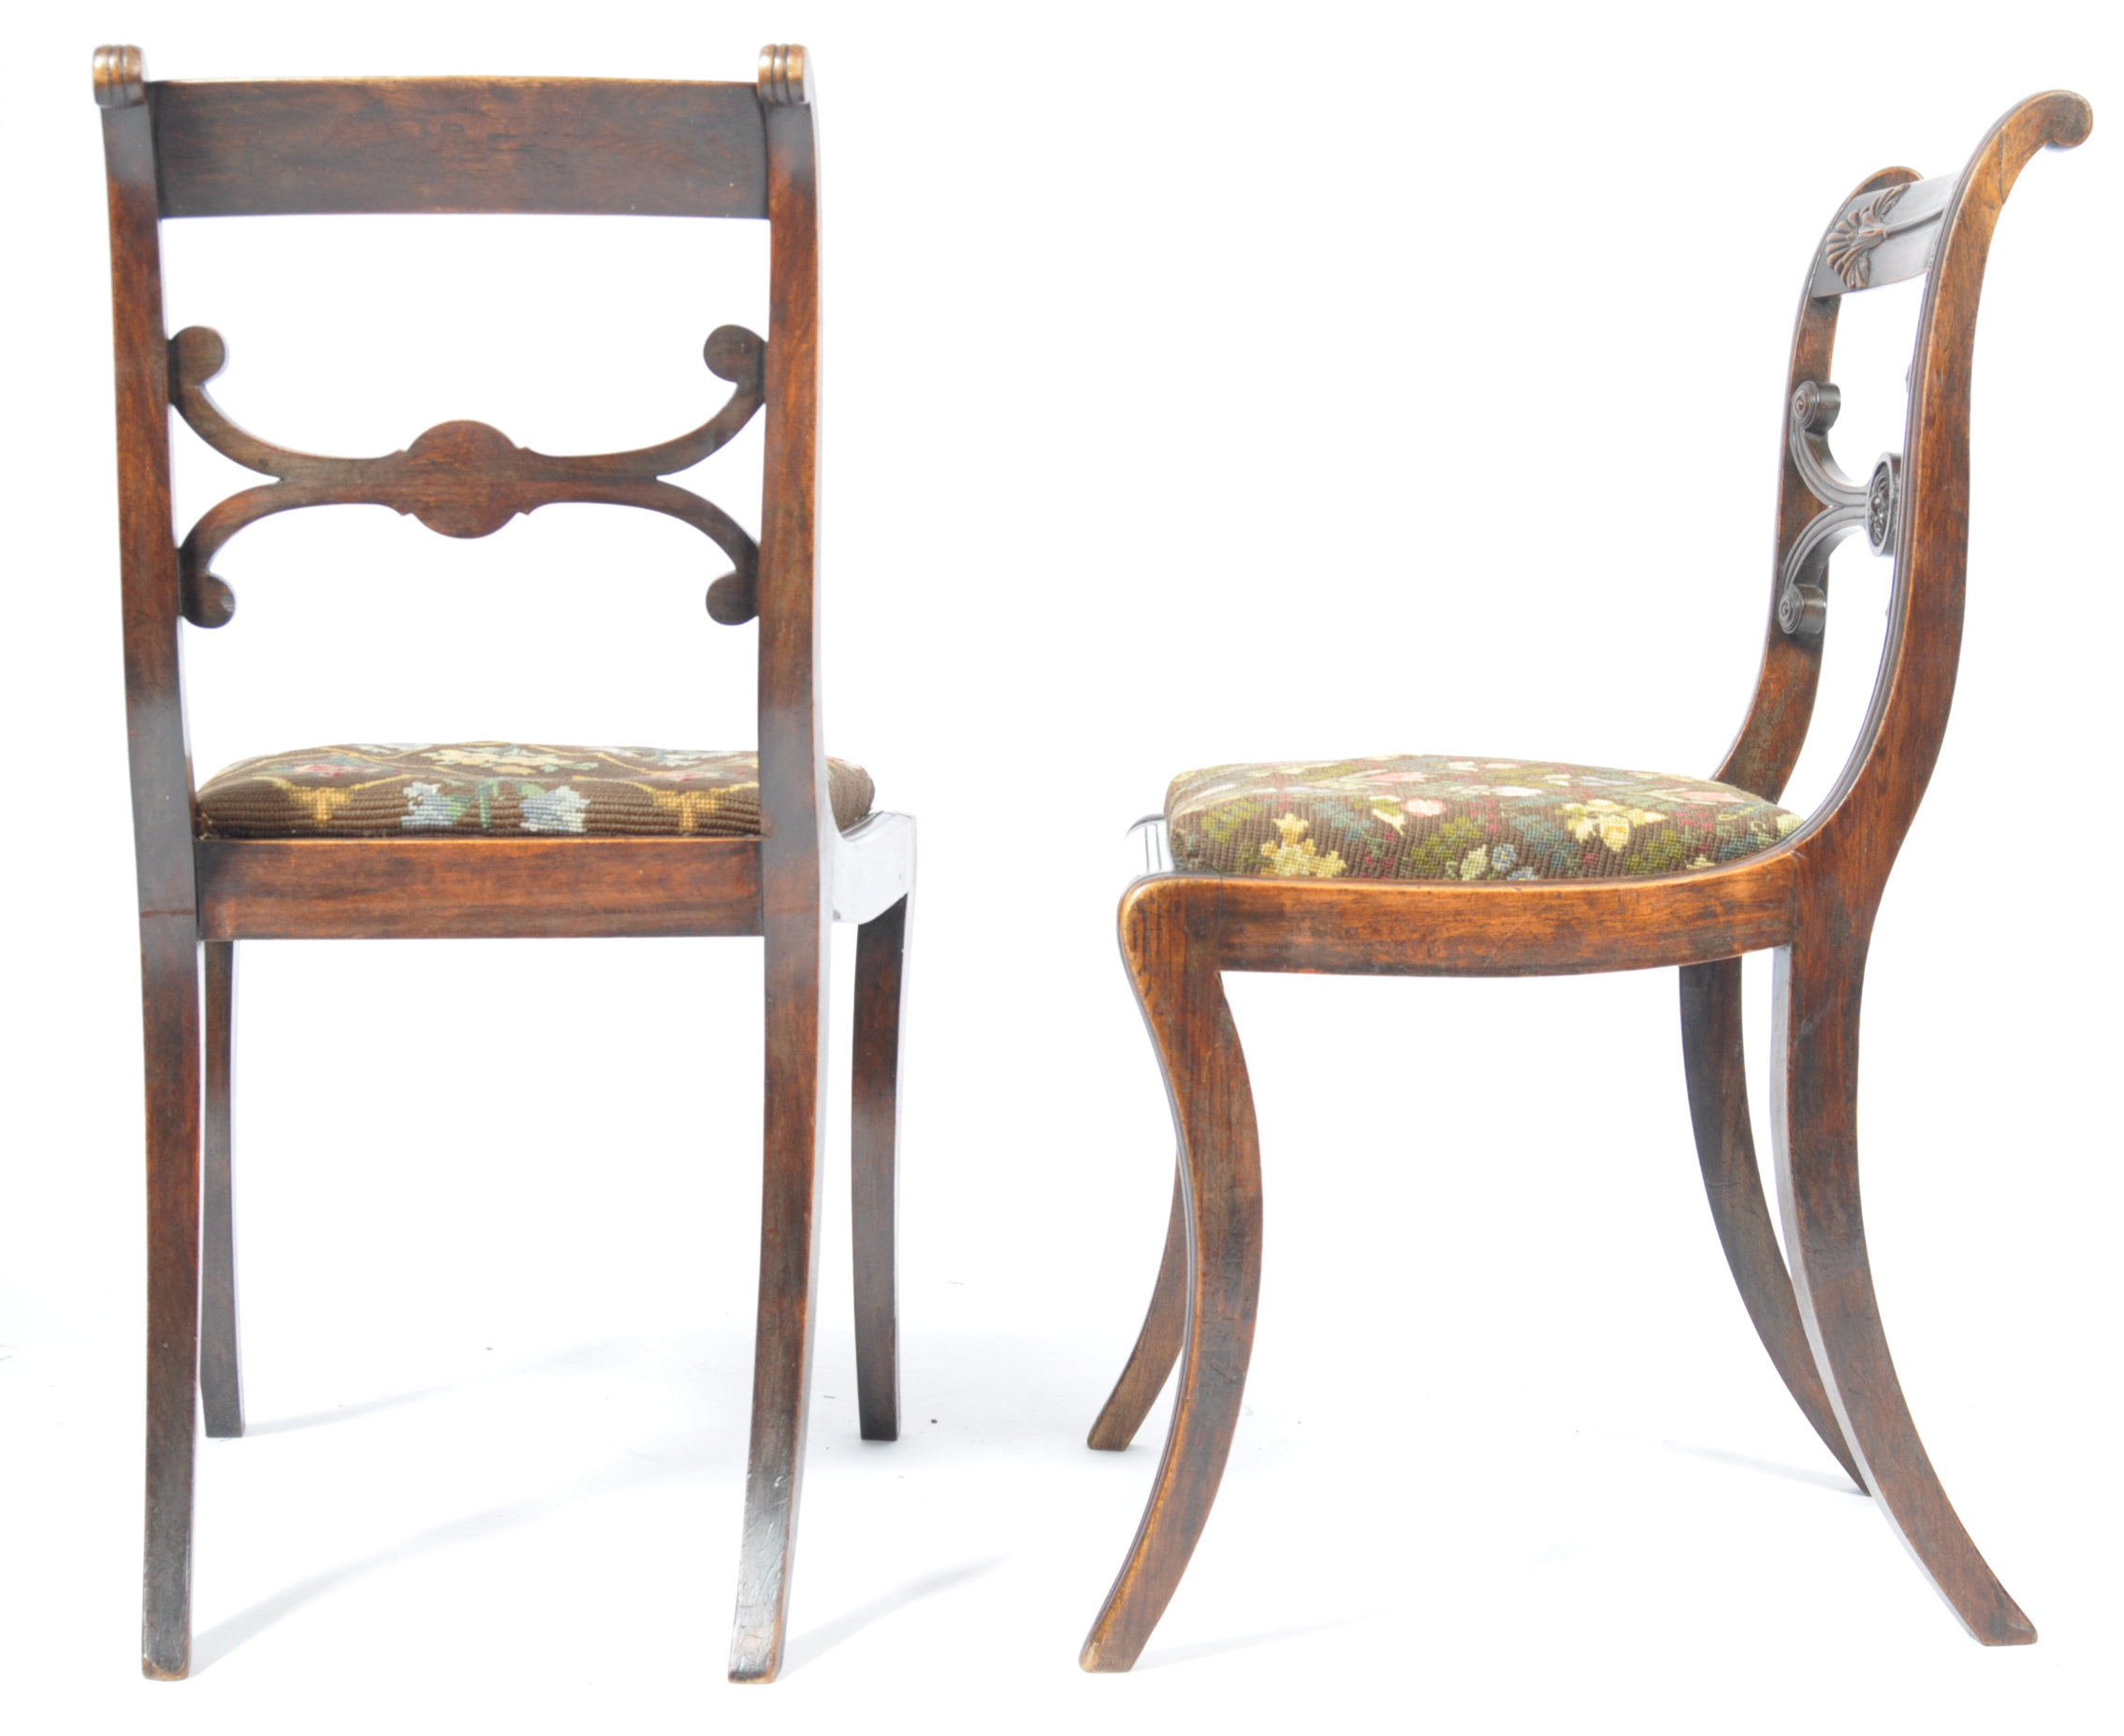 PAIR OF GILLOWS MANNER REGENCY SIDE CHAIRS - Image 7 of 9